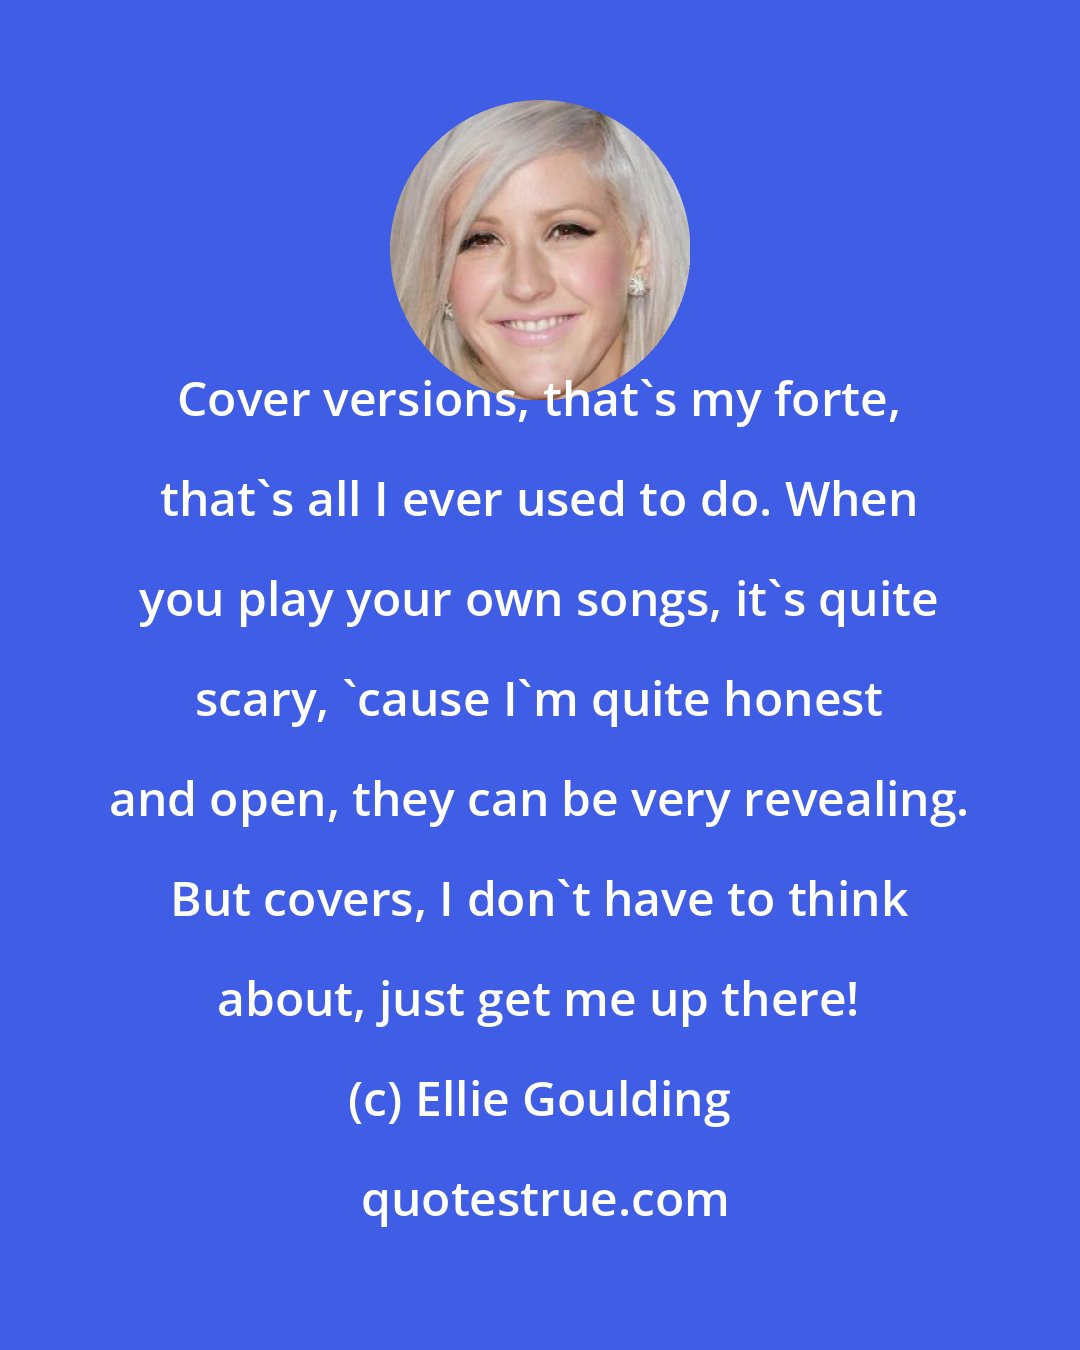 Ellie Goulding: Cover versions, that's my forte, that's all I ever used to do. When you play your own songs, it's quite scary, 'cause I'm quite honest and open, they can be very revealing. But covers, I don't have to think about, just get me up there!